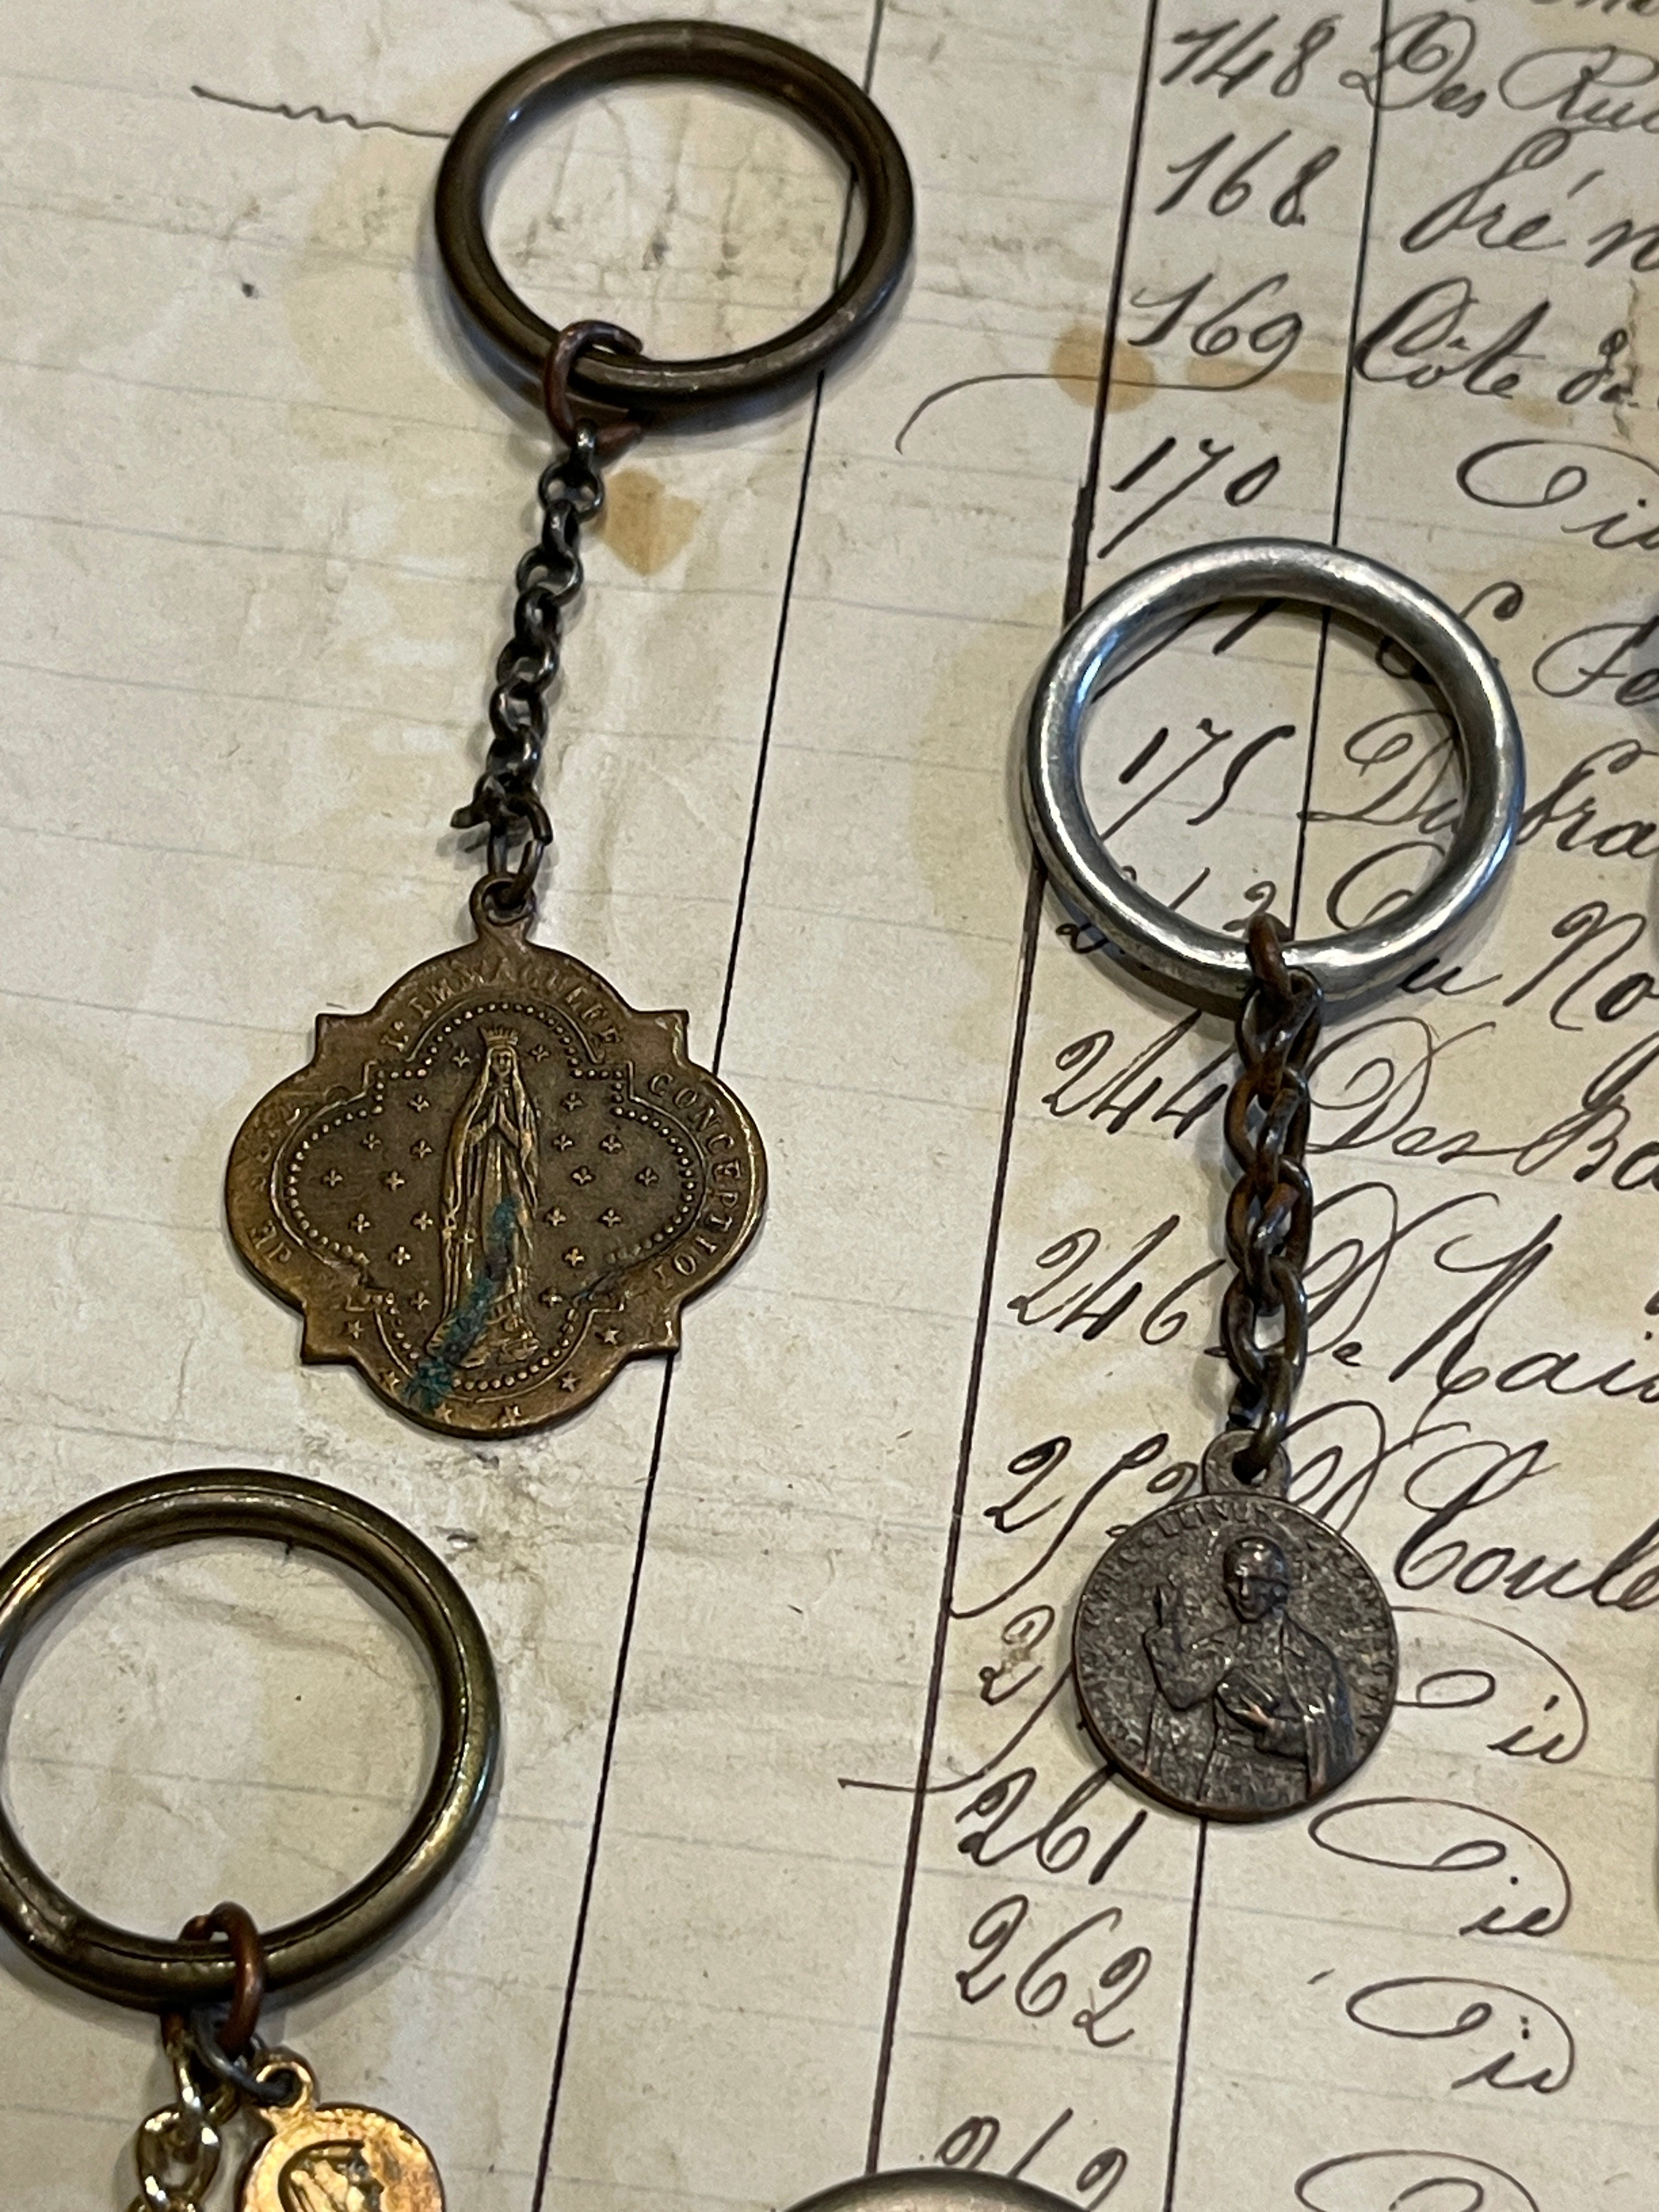 Antique French Medals - Key Chains?